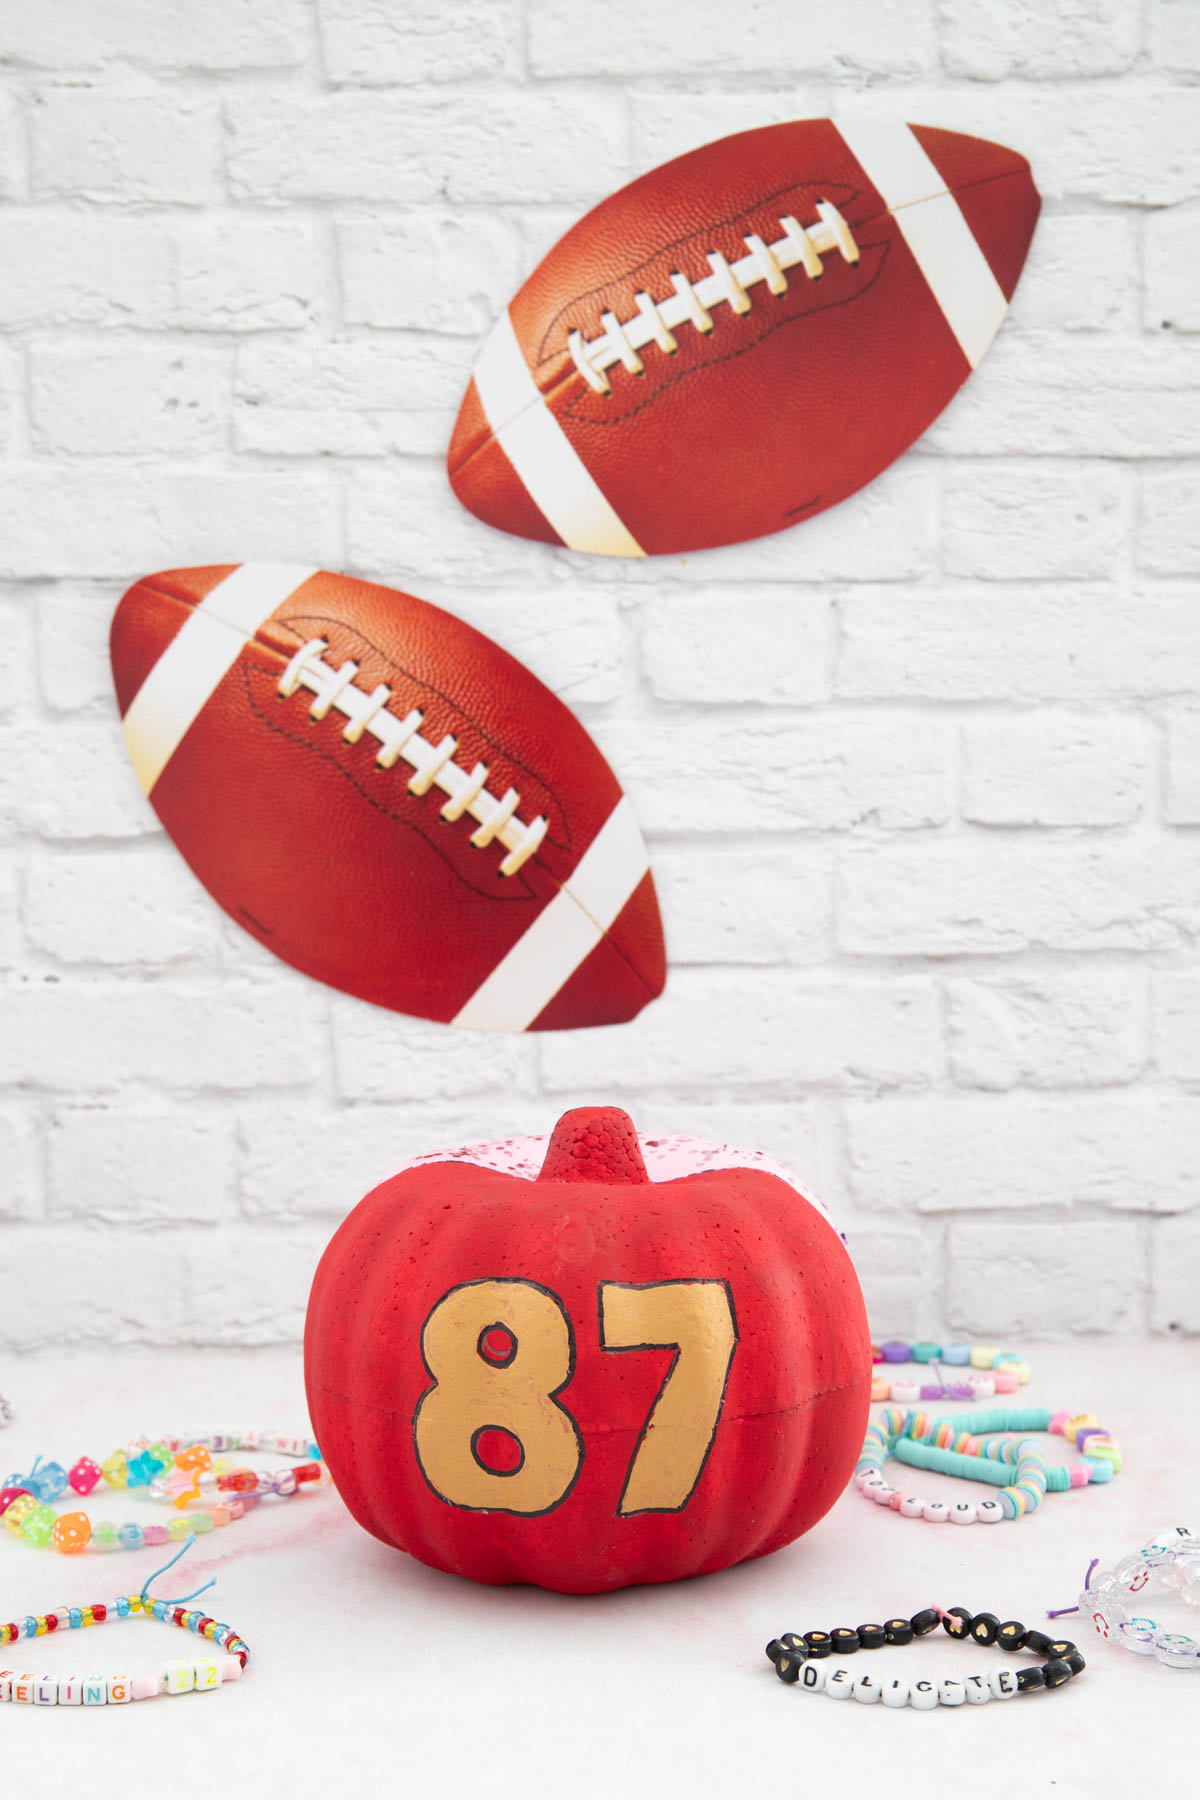 A pumpkin with the number 87 on it next to a friendship bracelets.